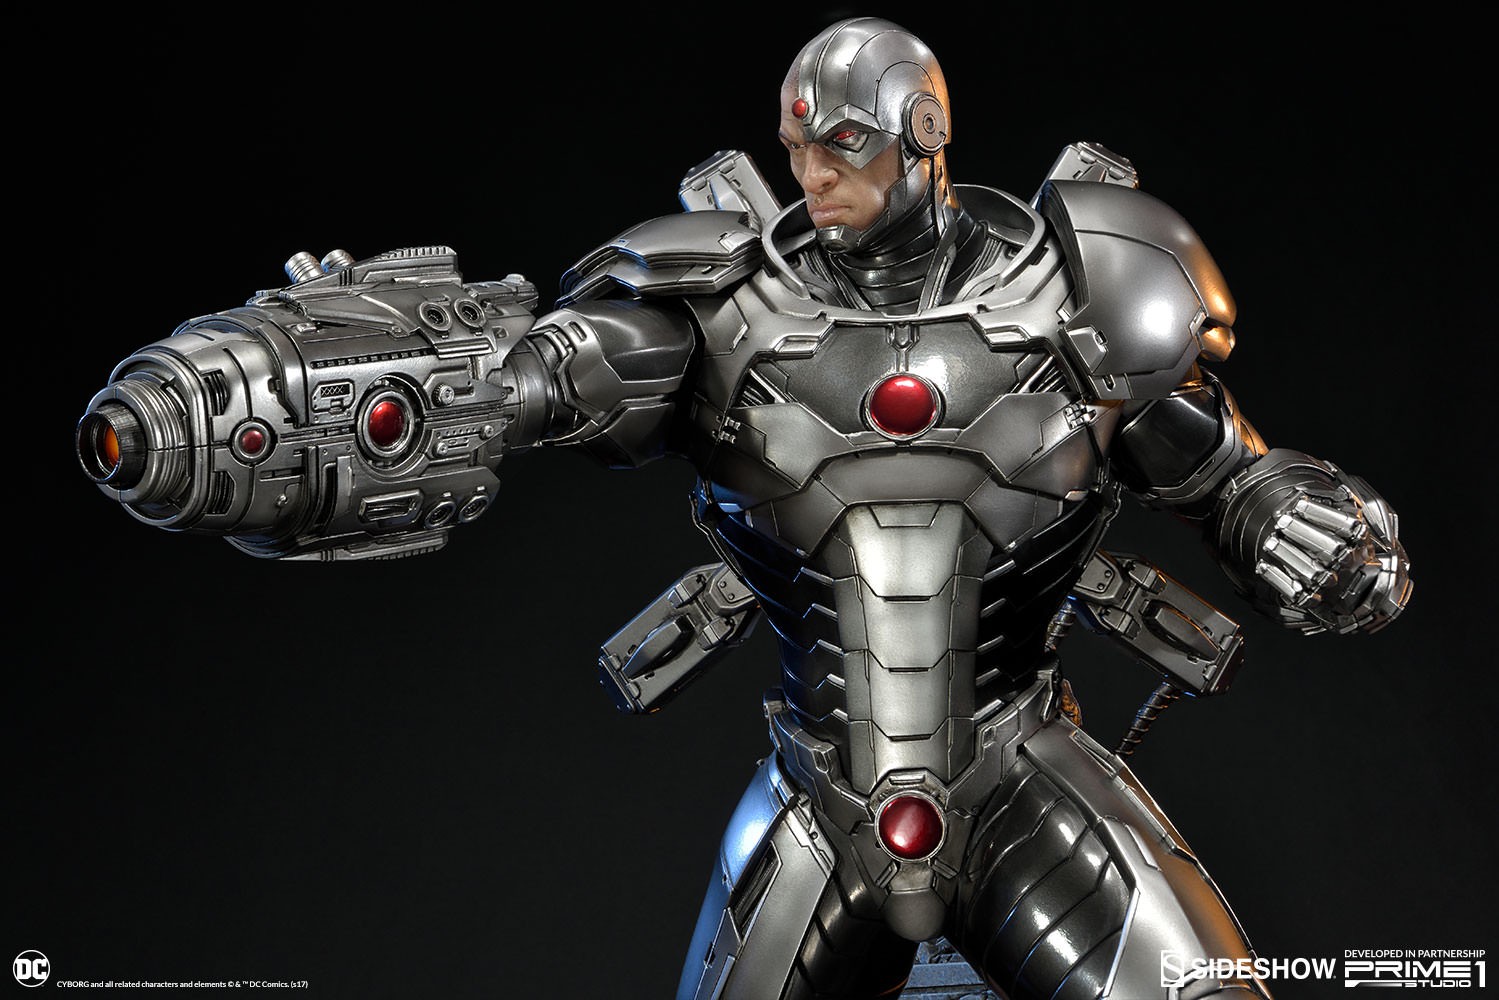 Cyborg Exclusive Edition (Prototype Shown) View 17